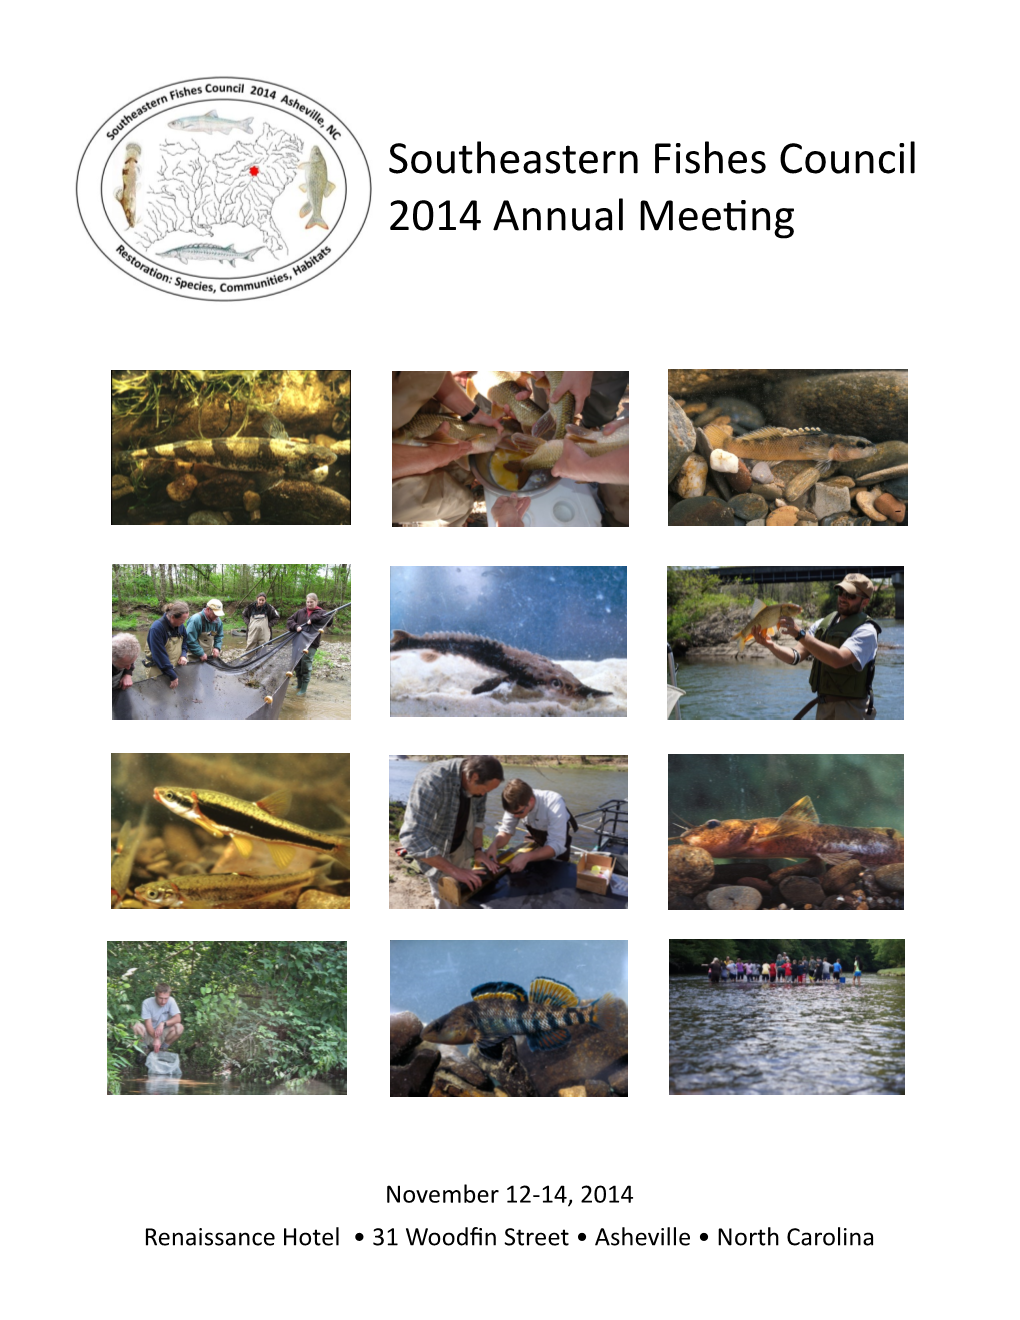 Southeastern Fishes Council 2014 Annual Meeting